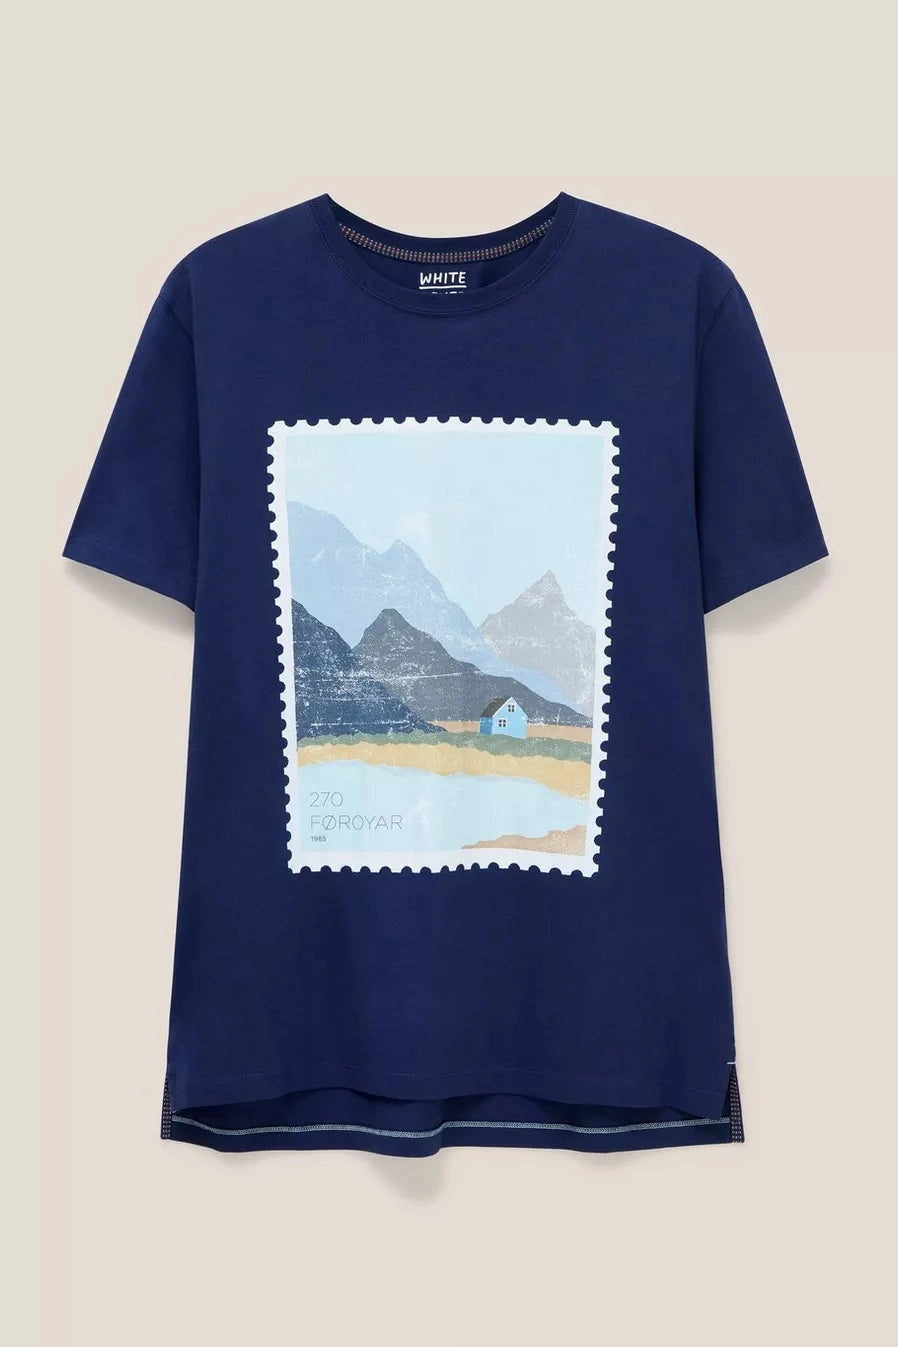 White Stuff Foroyar Graphic T-shirt-Mens-Ohh! By Gum - Shop Sustainable